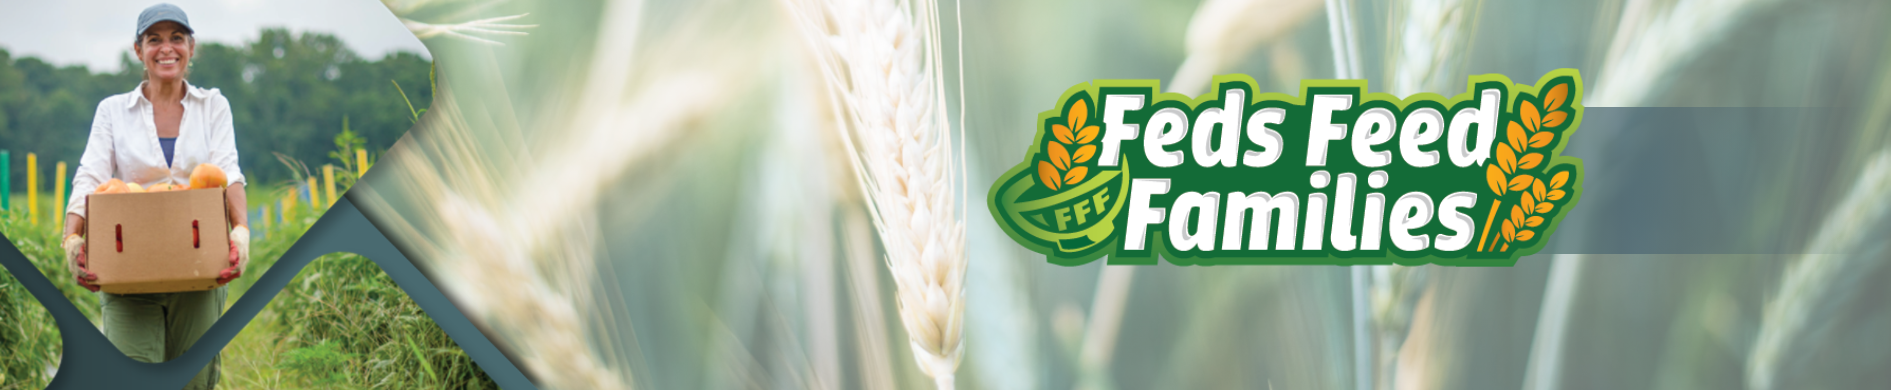 Johnson’s 2021 Feds Feeds Families Campaign to Feed Our Community long banner image